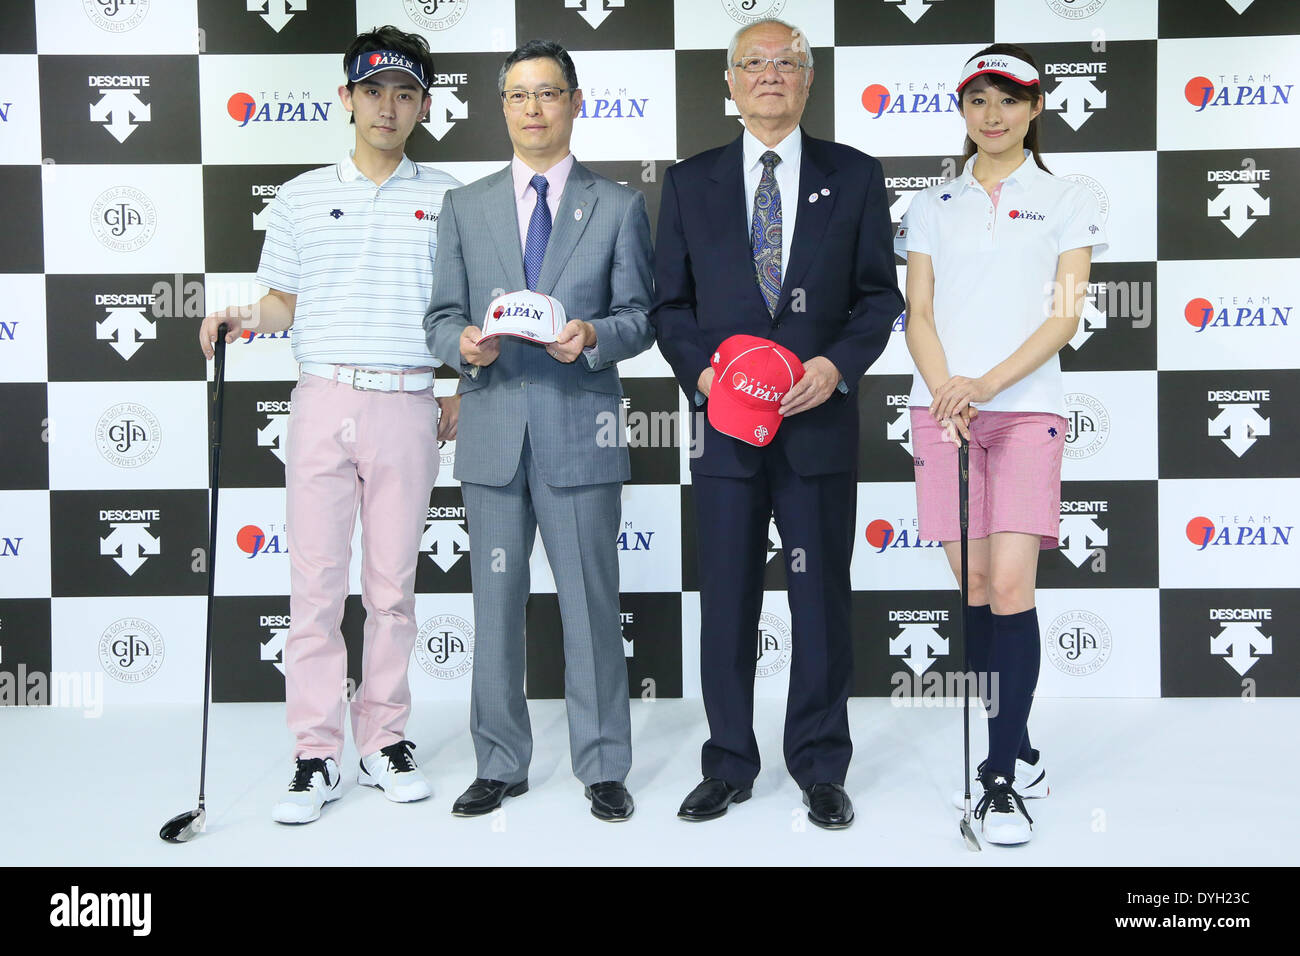 (L-R) Masatoshi Ishimoto, Takayuki Anzai, APRIL 17, 2014 : A press conference about Japanese sports brand DESCENTE at Tokyo, Japan. DESCENTE made an official supplier agreement with Japan Golf Association (JGA) and started their new brand 'DESCENTE GOLF'. Credit:  Yohei Osada/AFLO SPORT/Alamy Live News Stock Photo